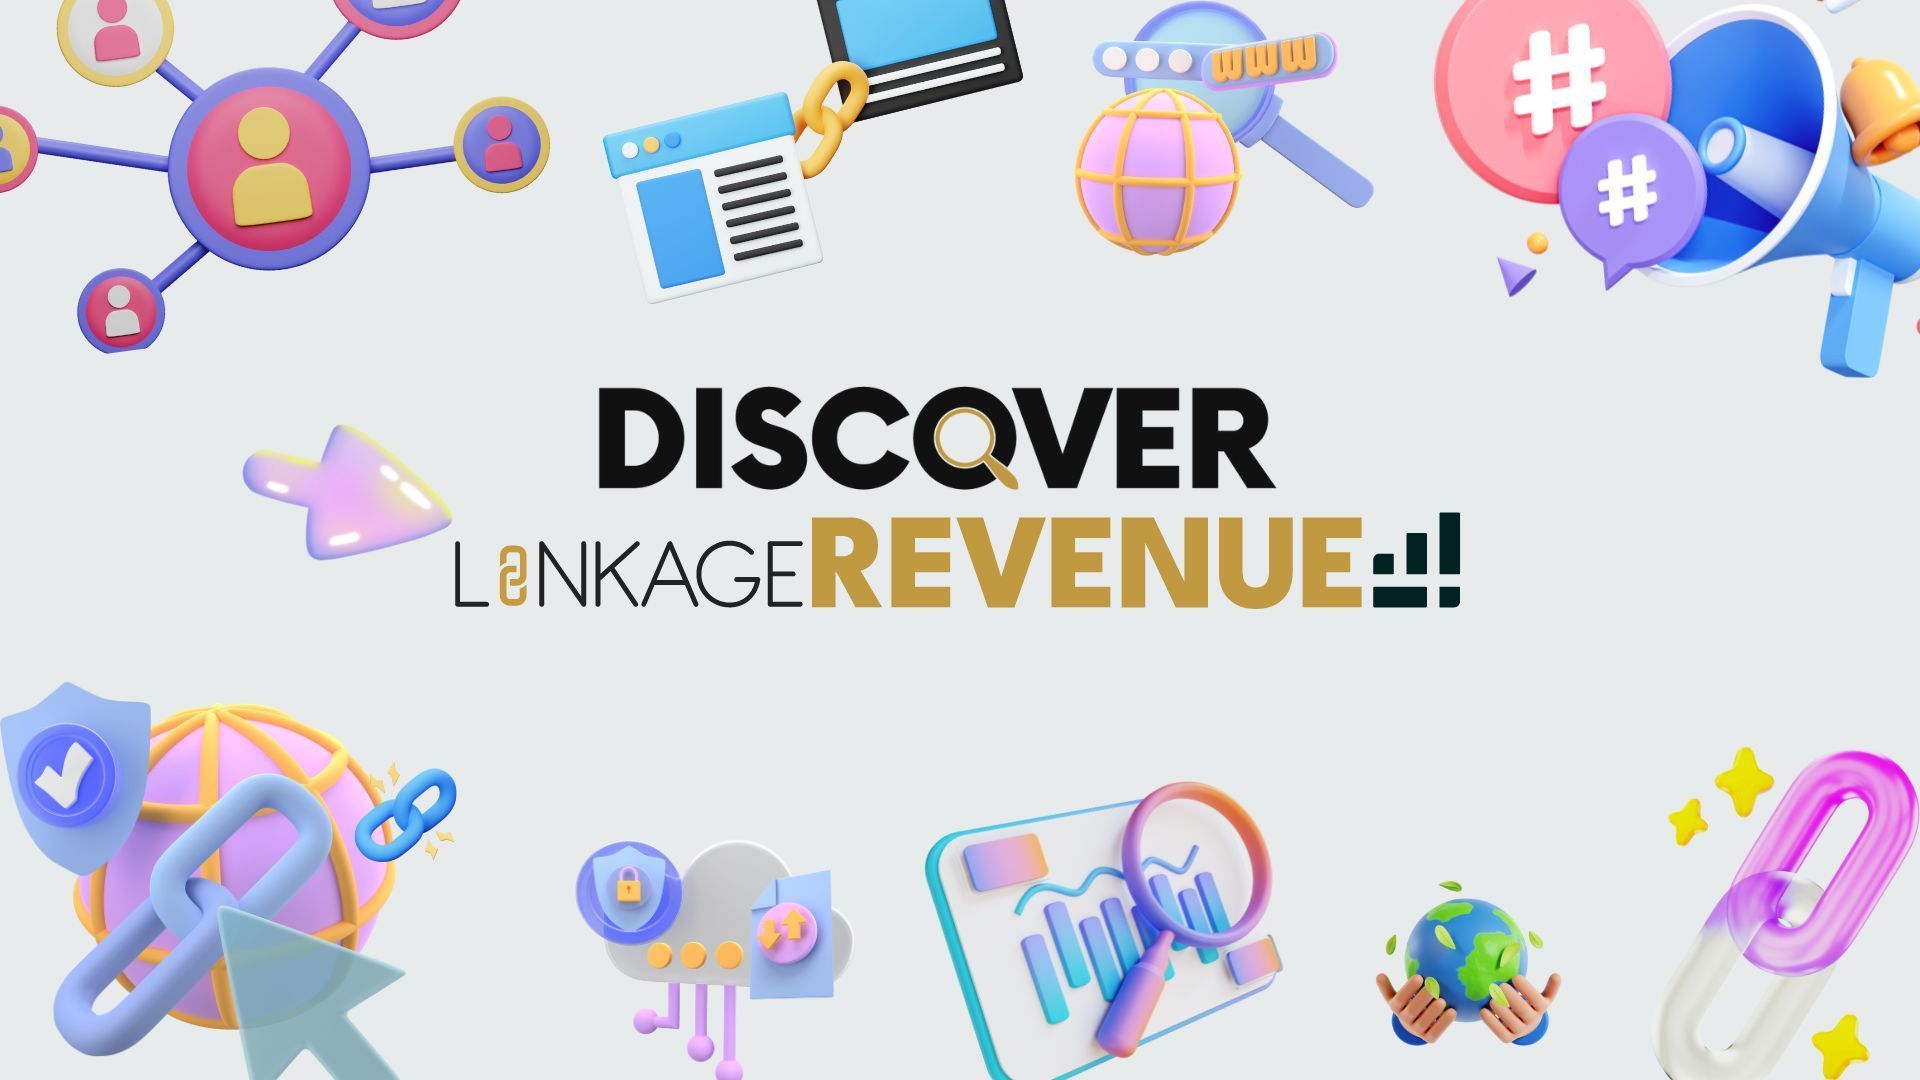 Image for the Linkage Revenue webinar on hotel revenue management and strategies